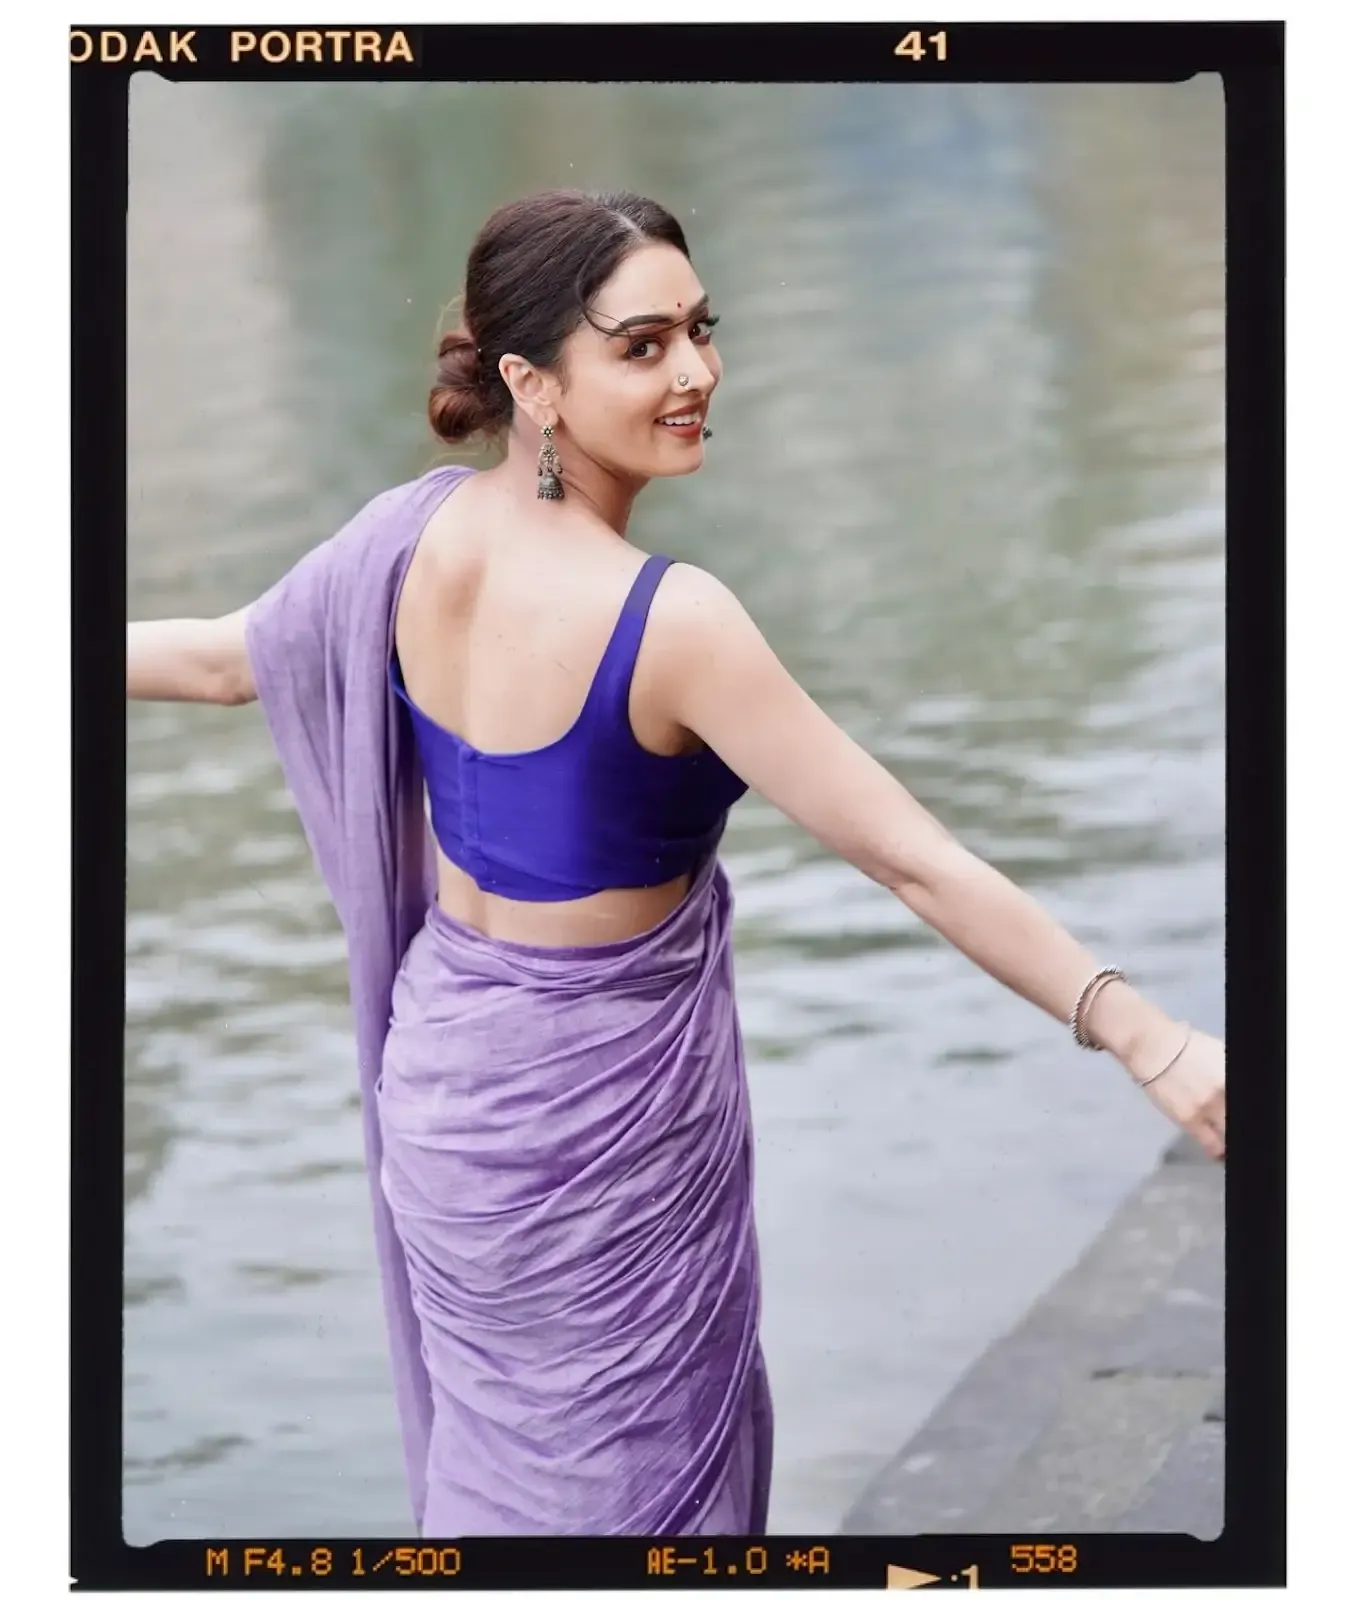 NORTH INDIAN GIRL SANDEEPA DHAR IMAGES IN TRADITIONAL VIOLET SAREE 2